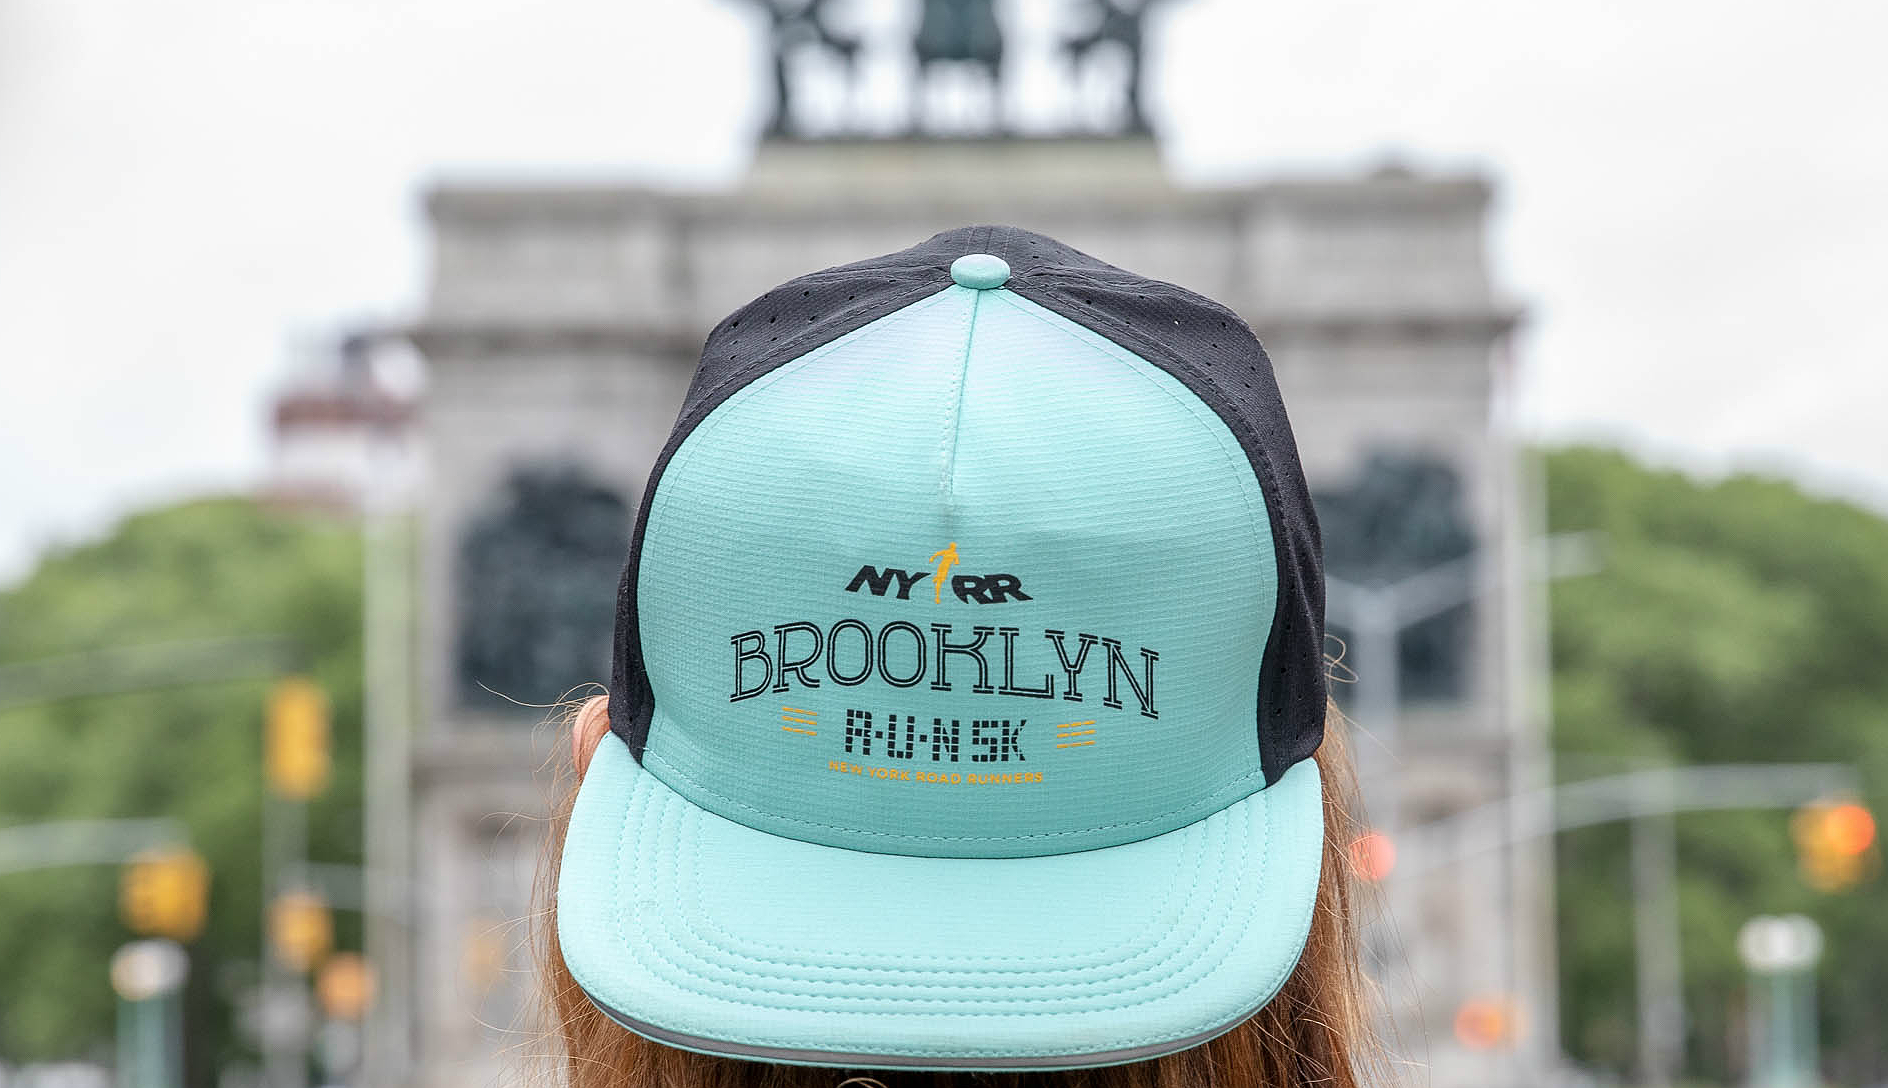 The NYRR Brooklyn RUN 5K Is the Perfect Alternative to Your Usual